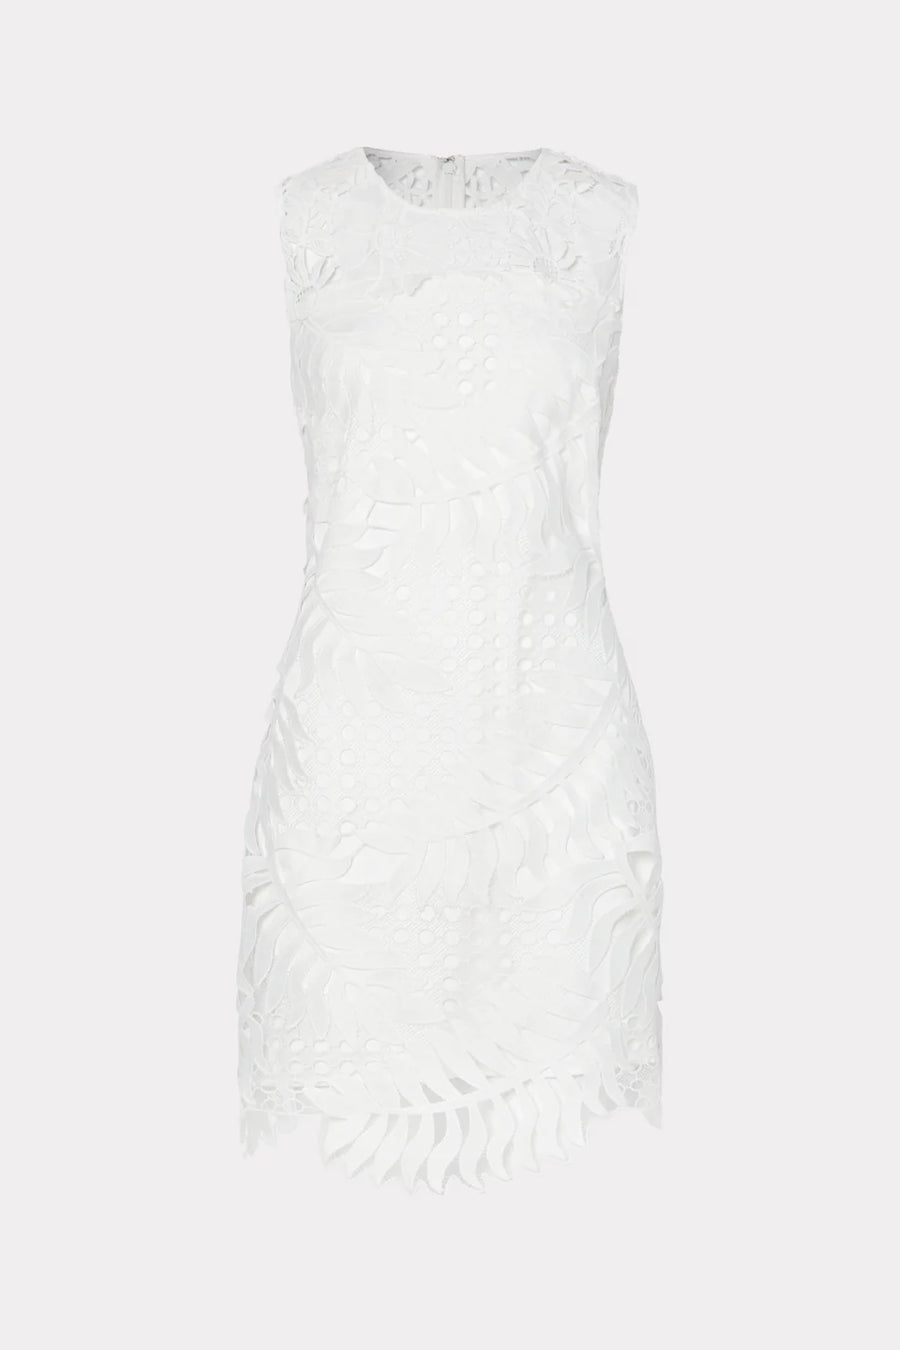 Milly Lace Dress